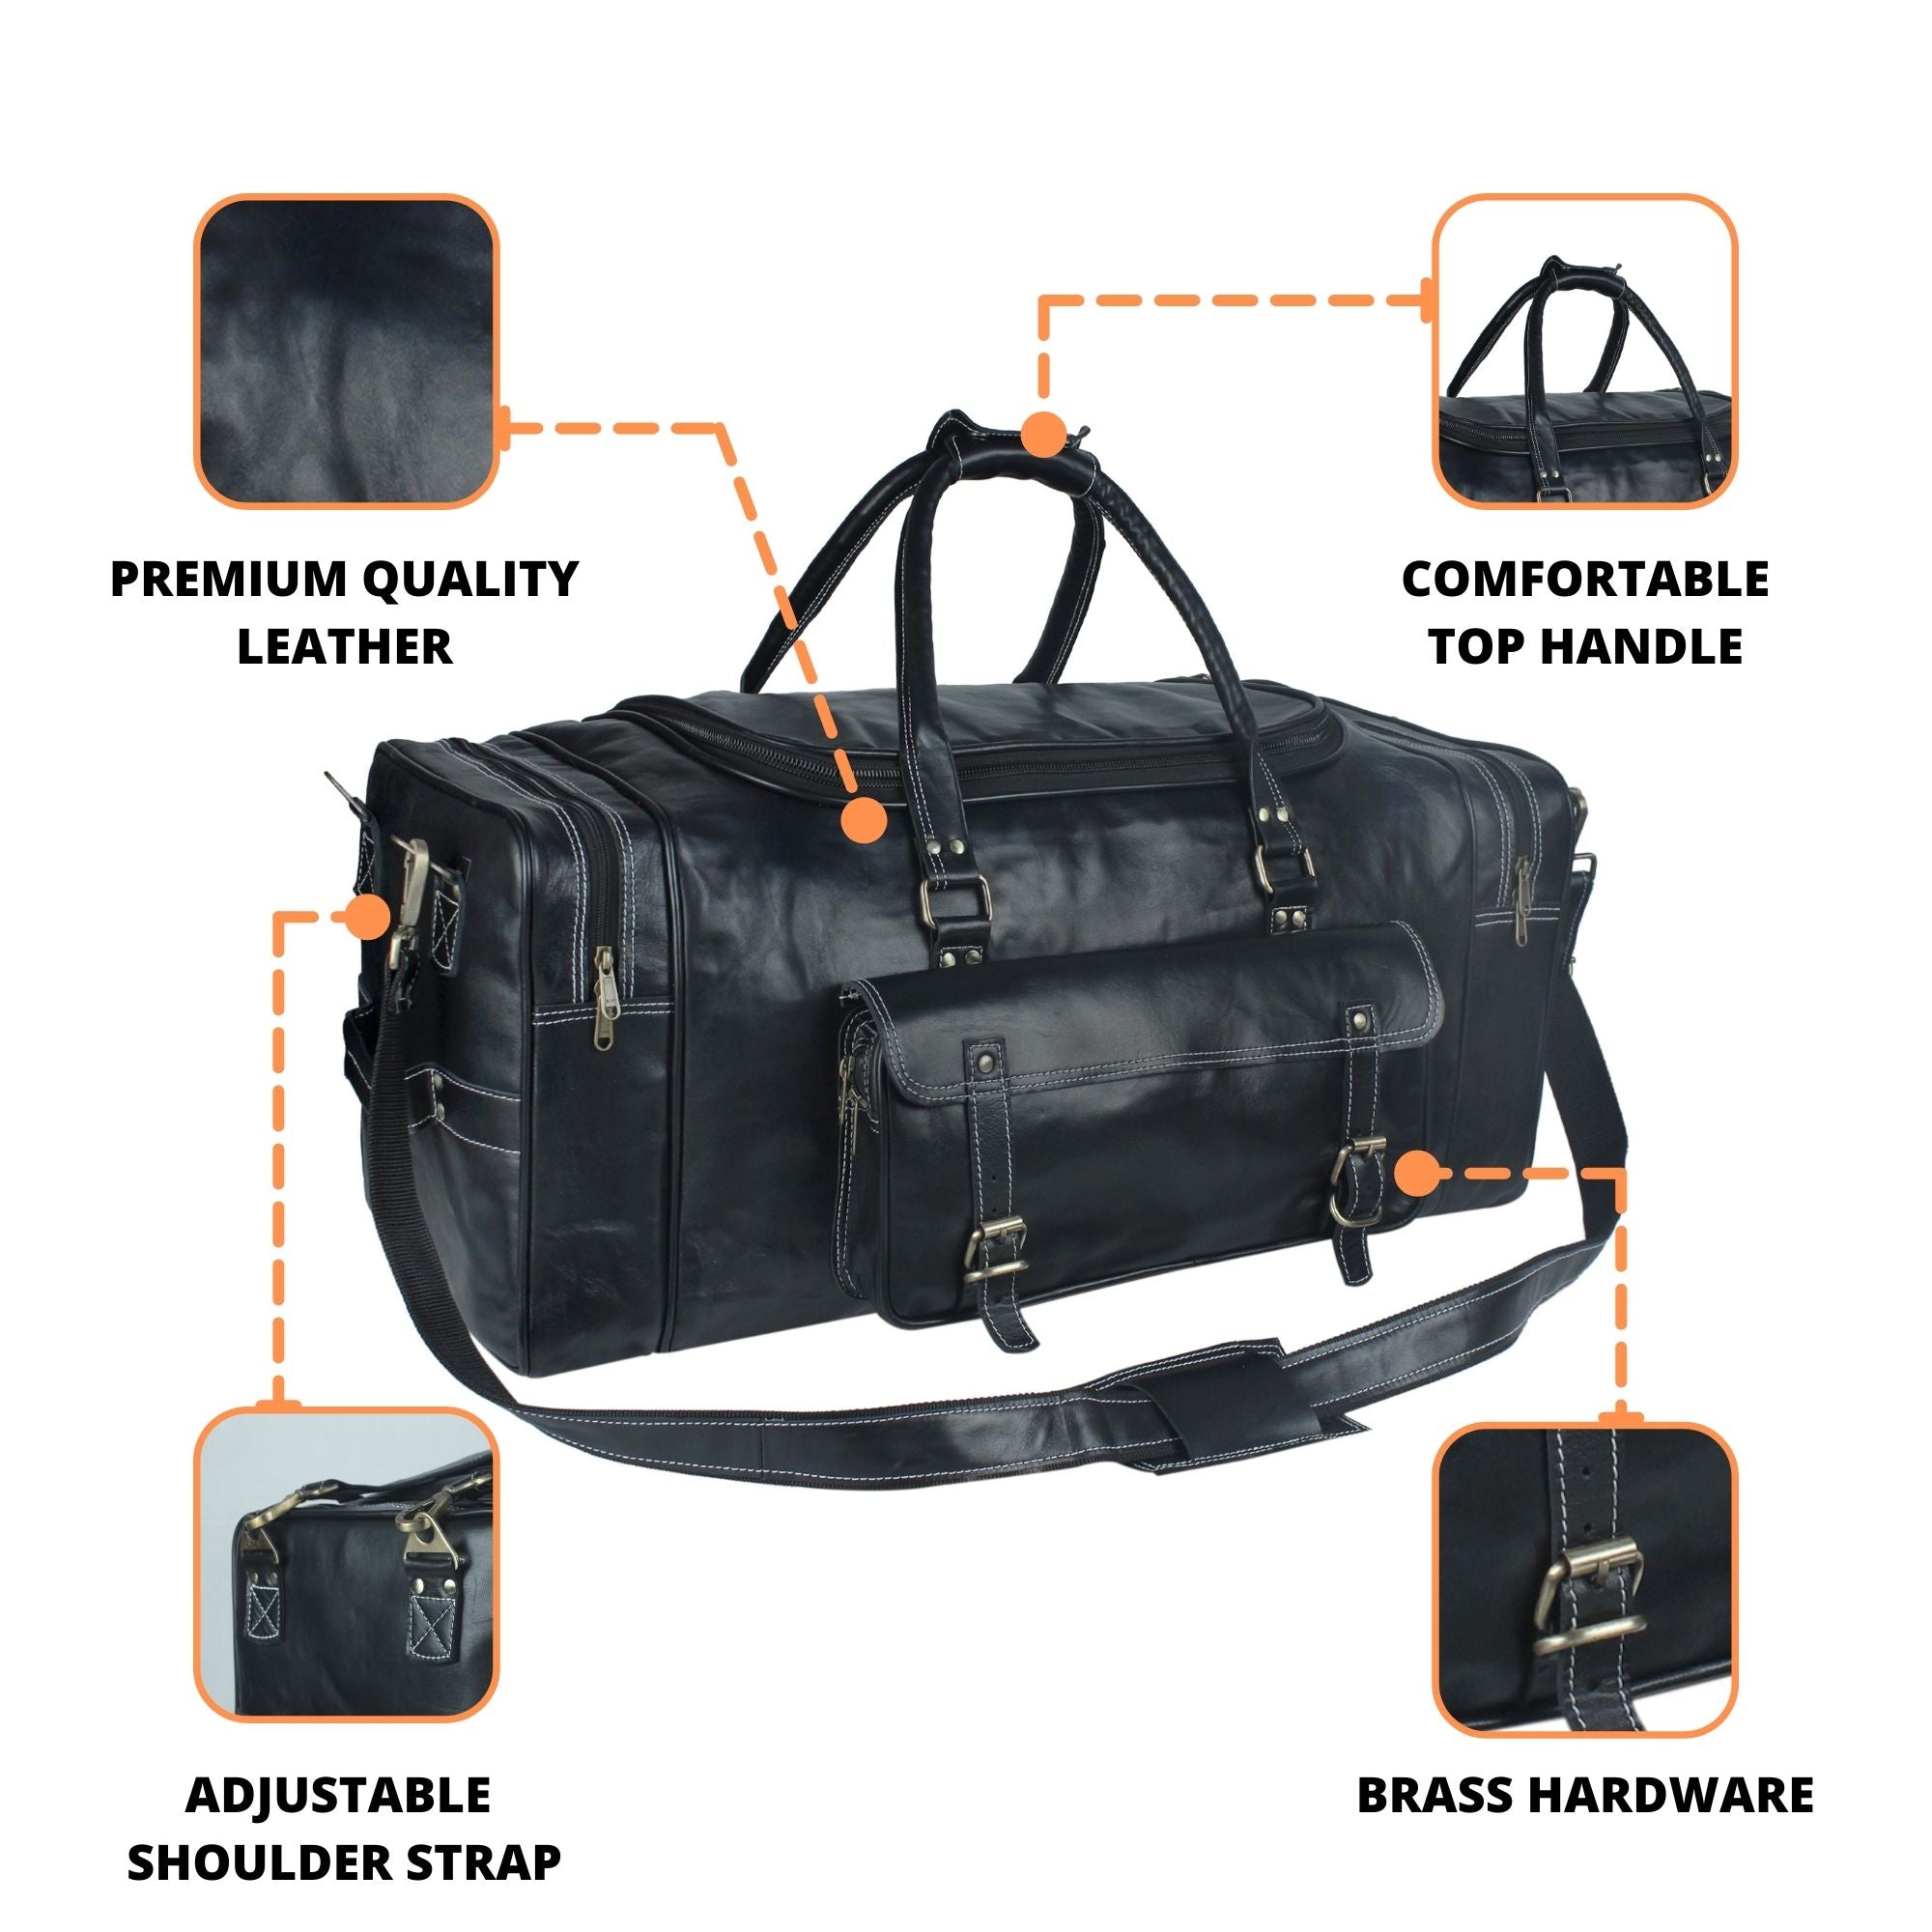 balck leather duffle bag specification